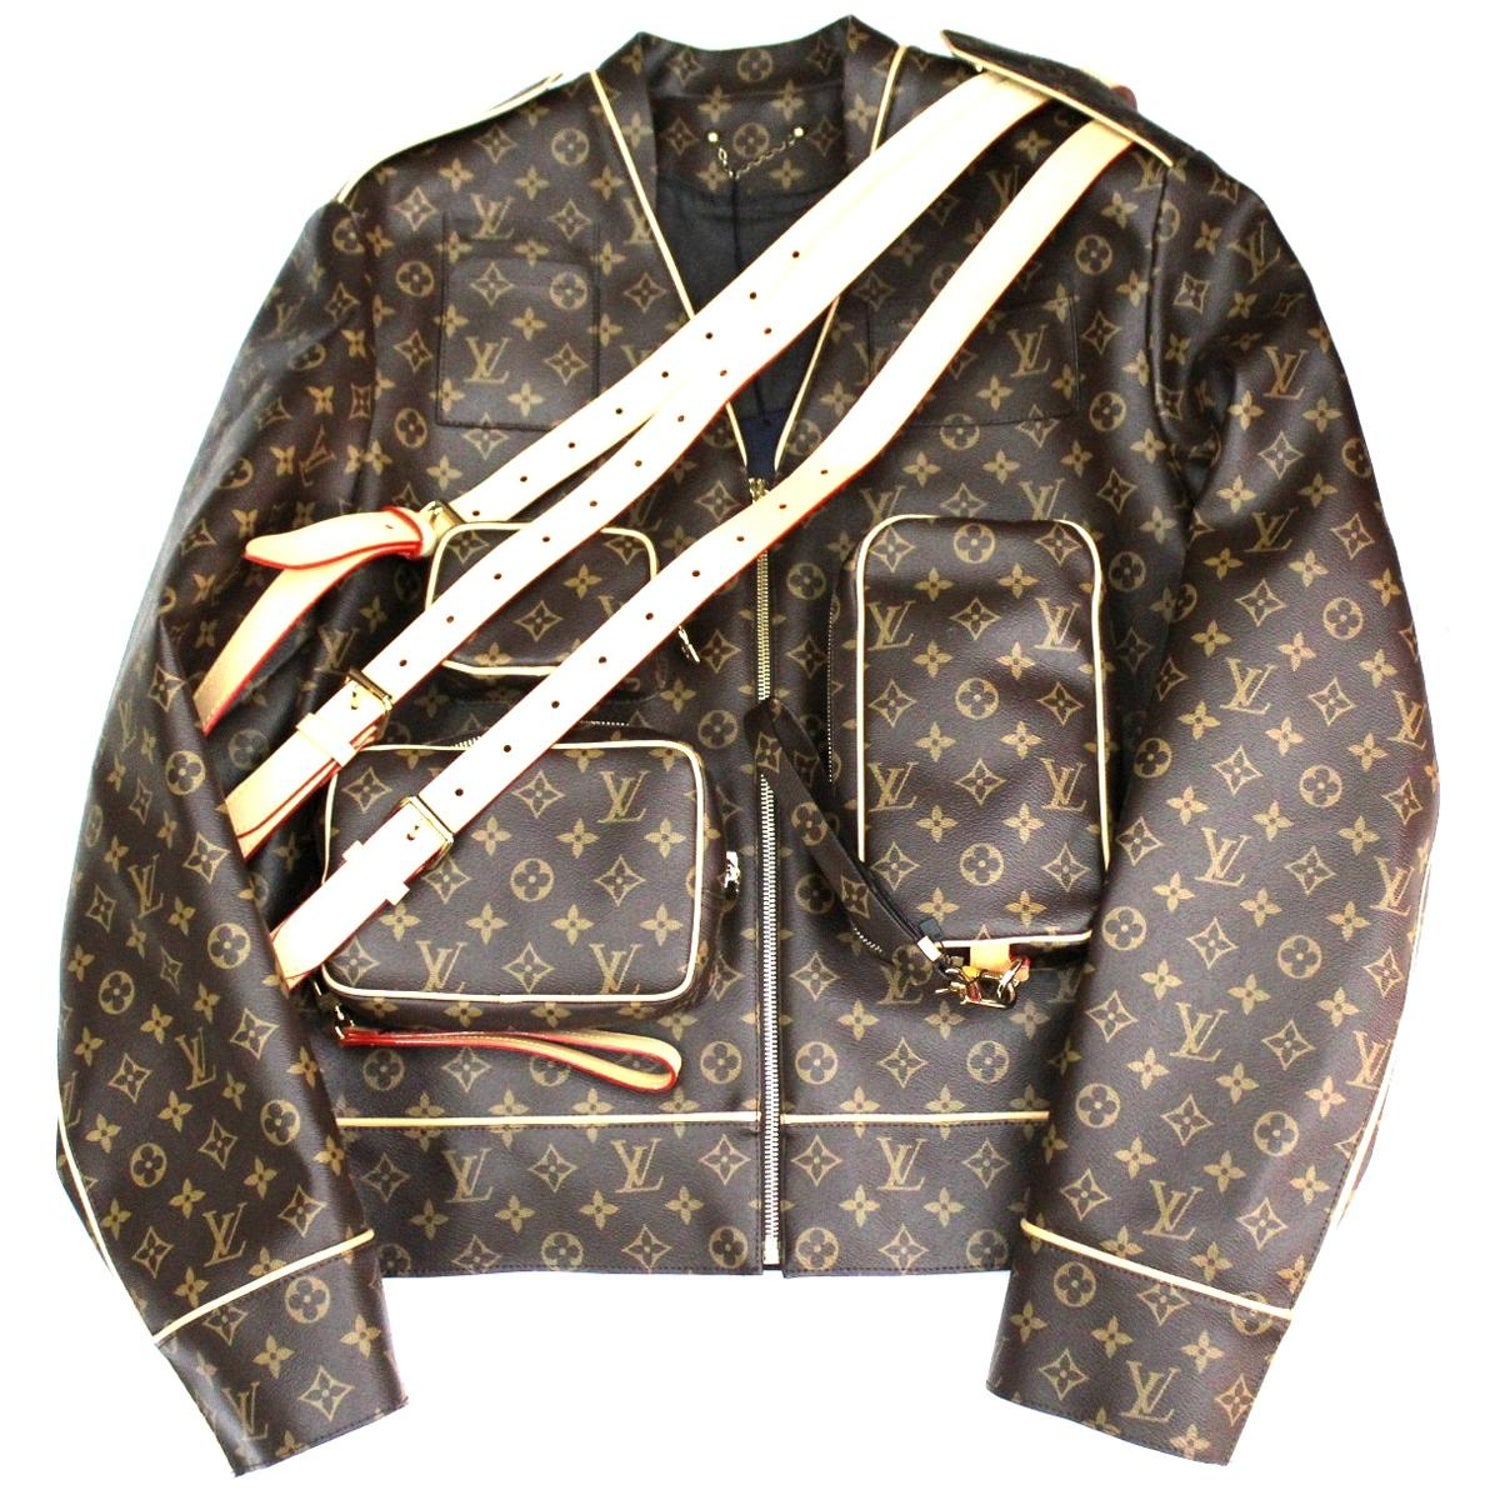 Louis Vuitton Leather Jackets - 15 For Sale on 1stDibs | lv leather jacket  price, louis vuitton leather jacket price, louis vuitton monogram leather  jacket